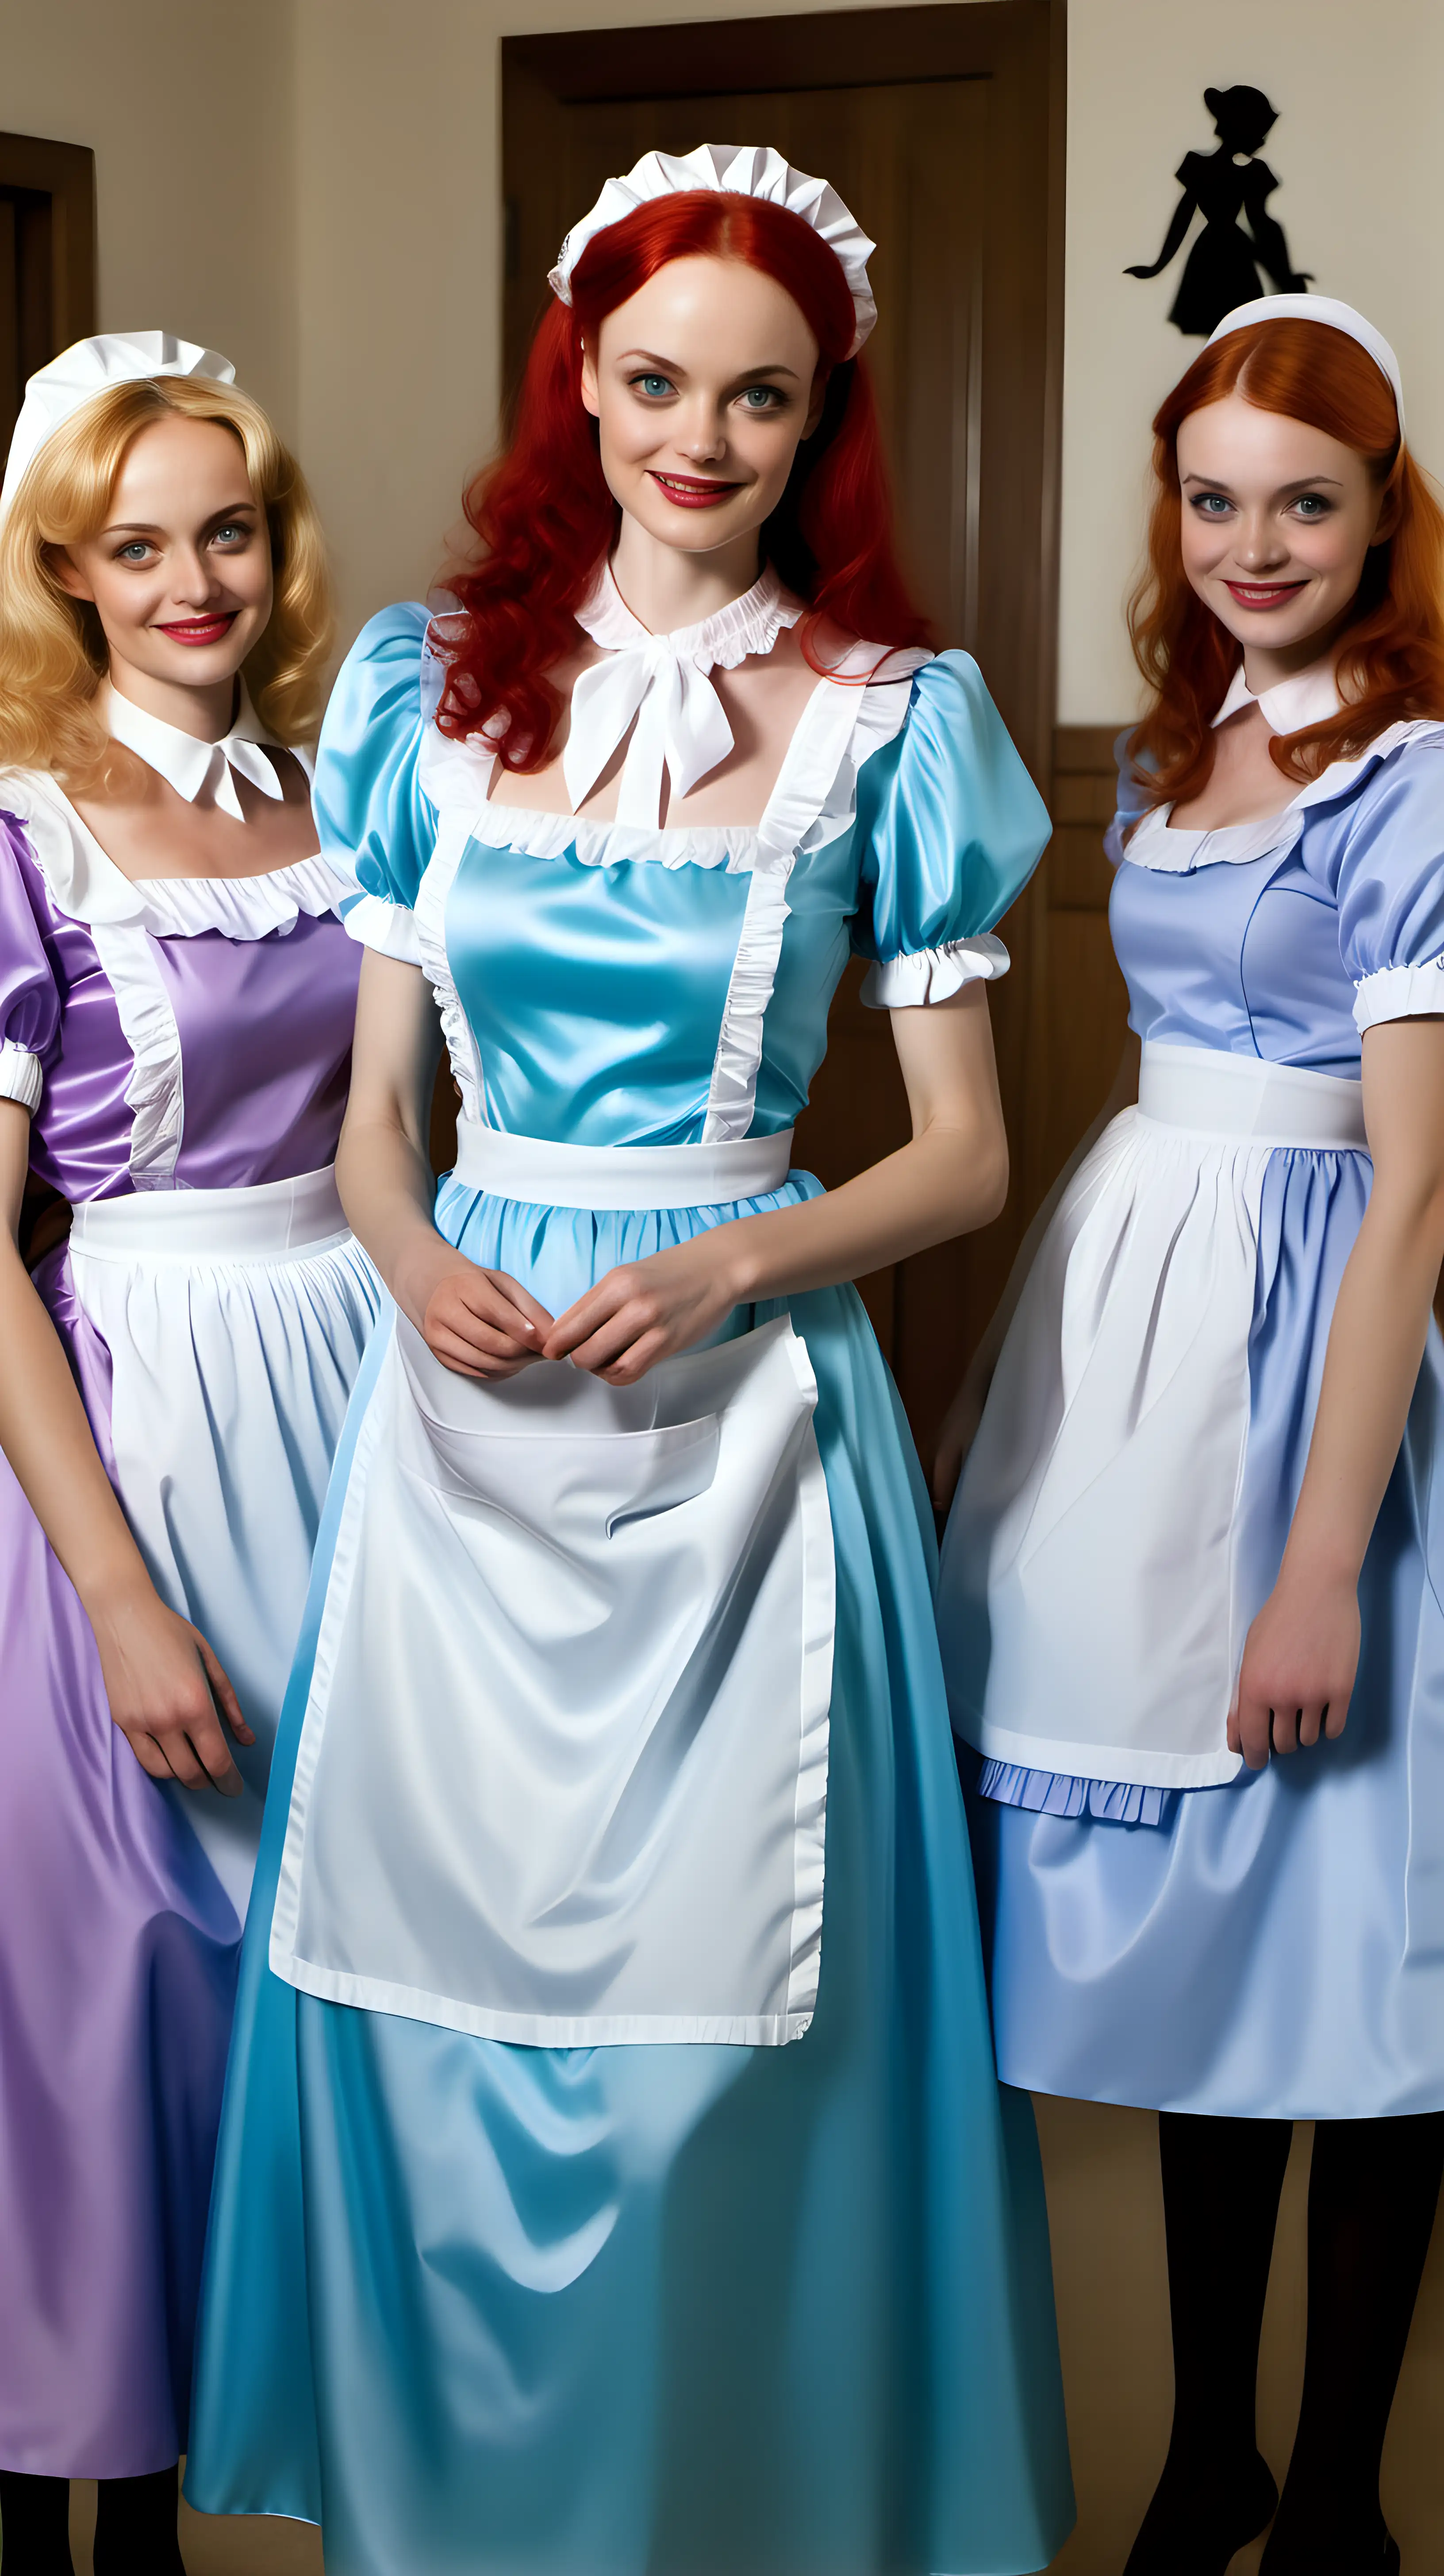 Vintage English Maid Girls with Mothers in Retro Silk Dresses